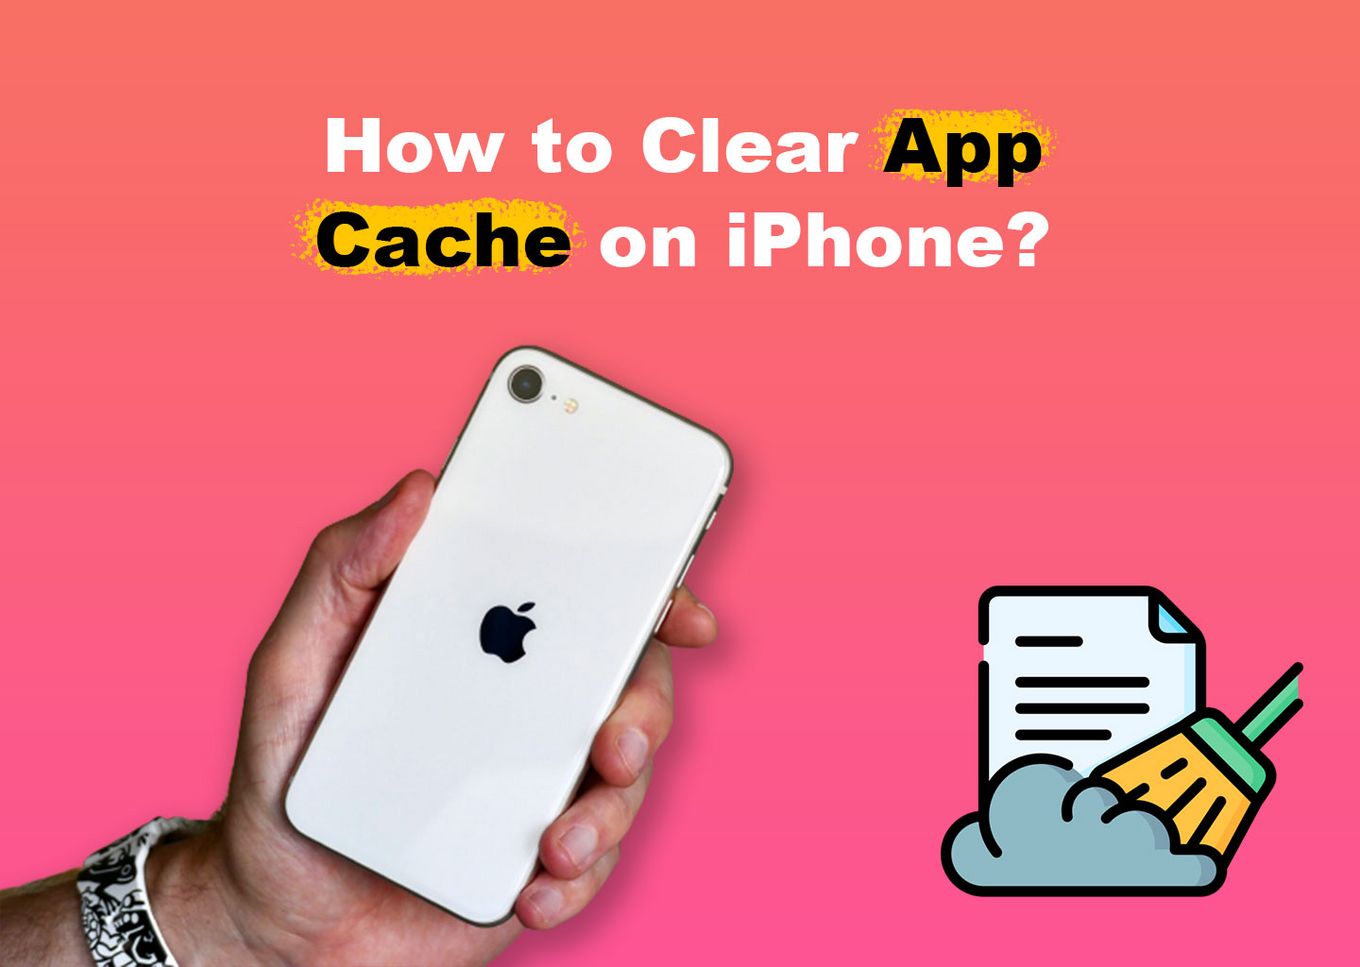 How to cleat app cache on an iPhone